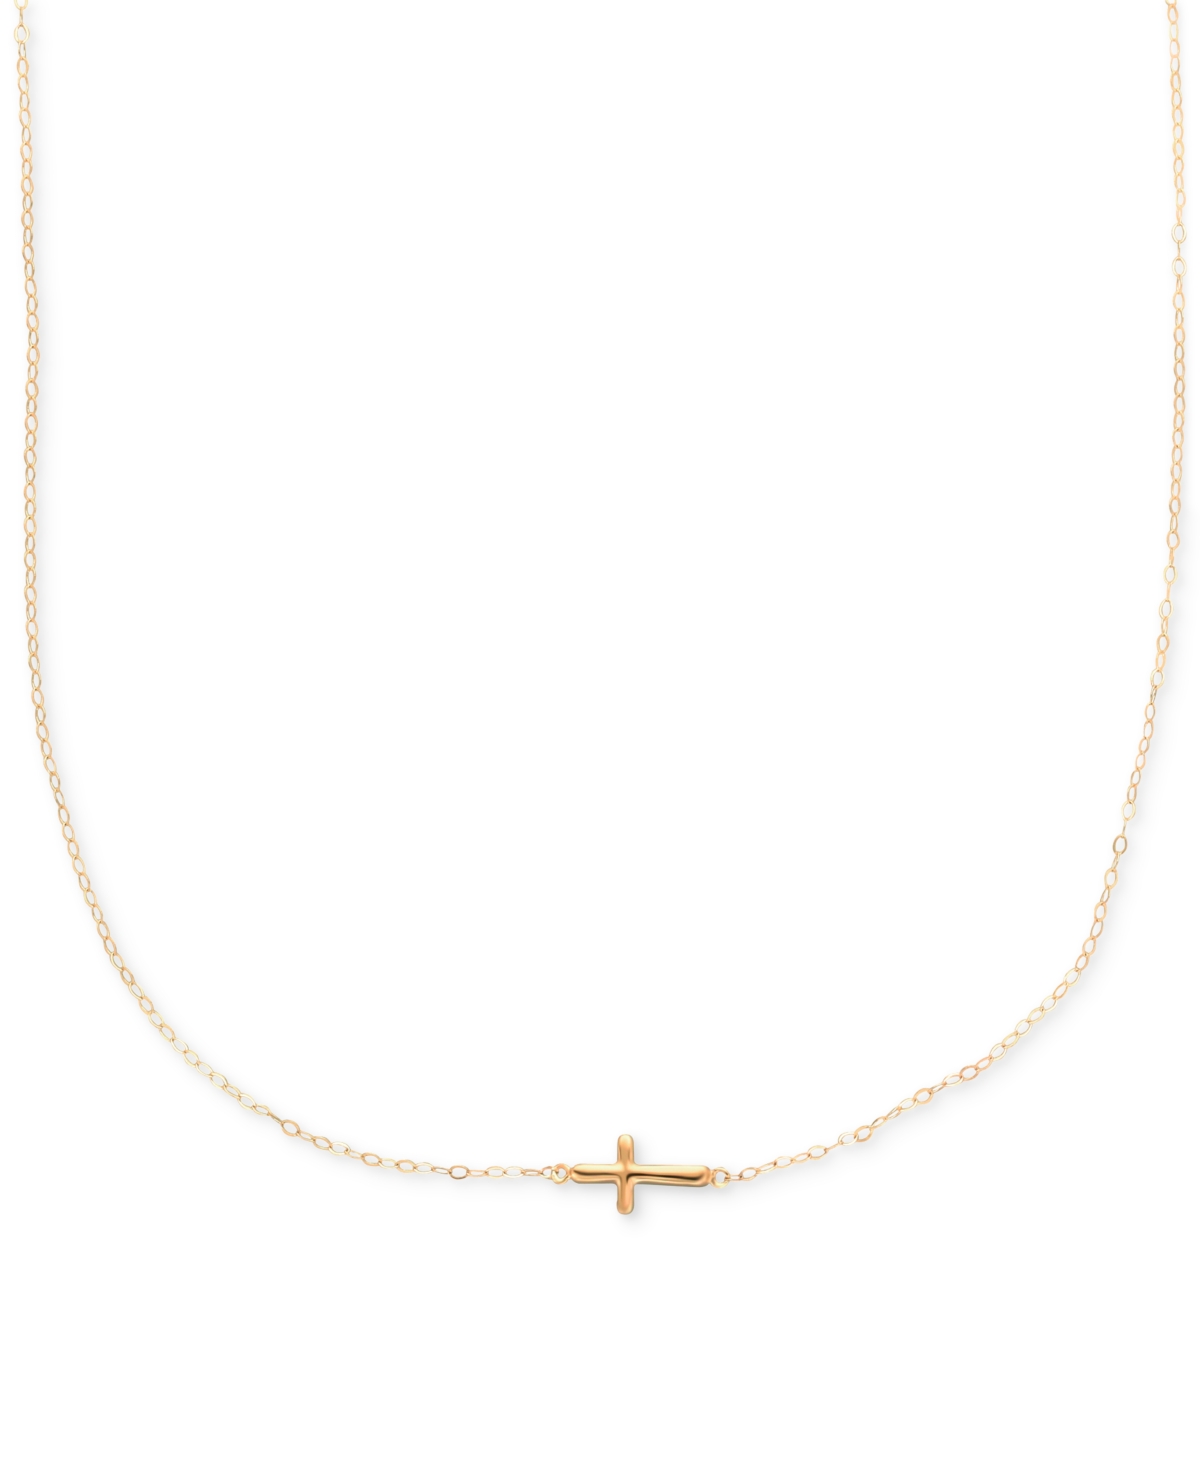 Sideways Cross Pendant Necklace in 10k Gold - Yellow Gold